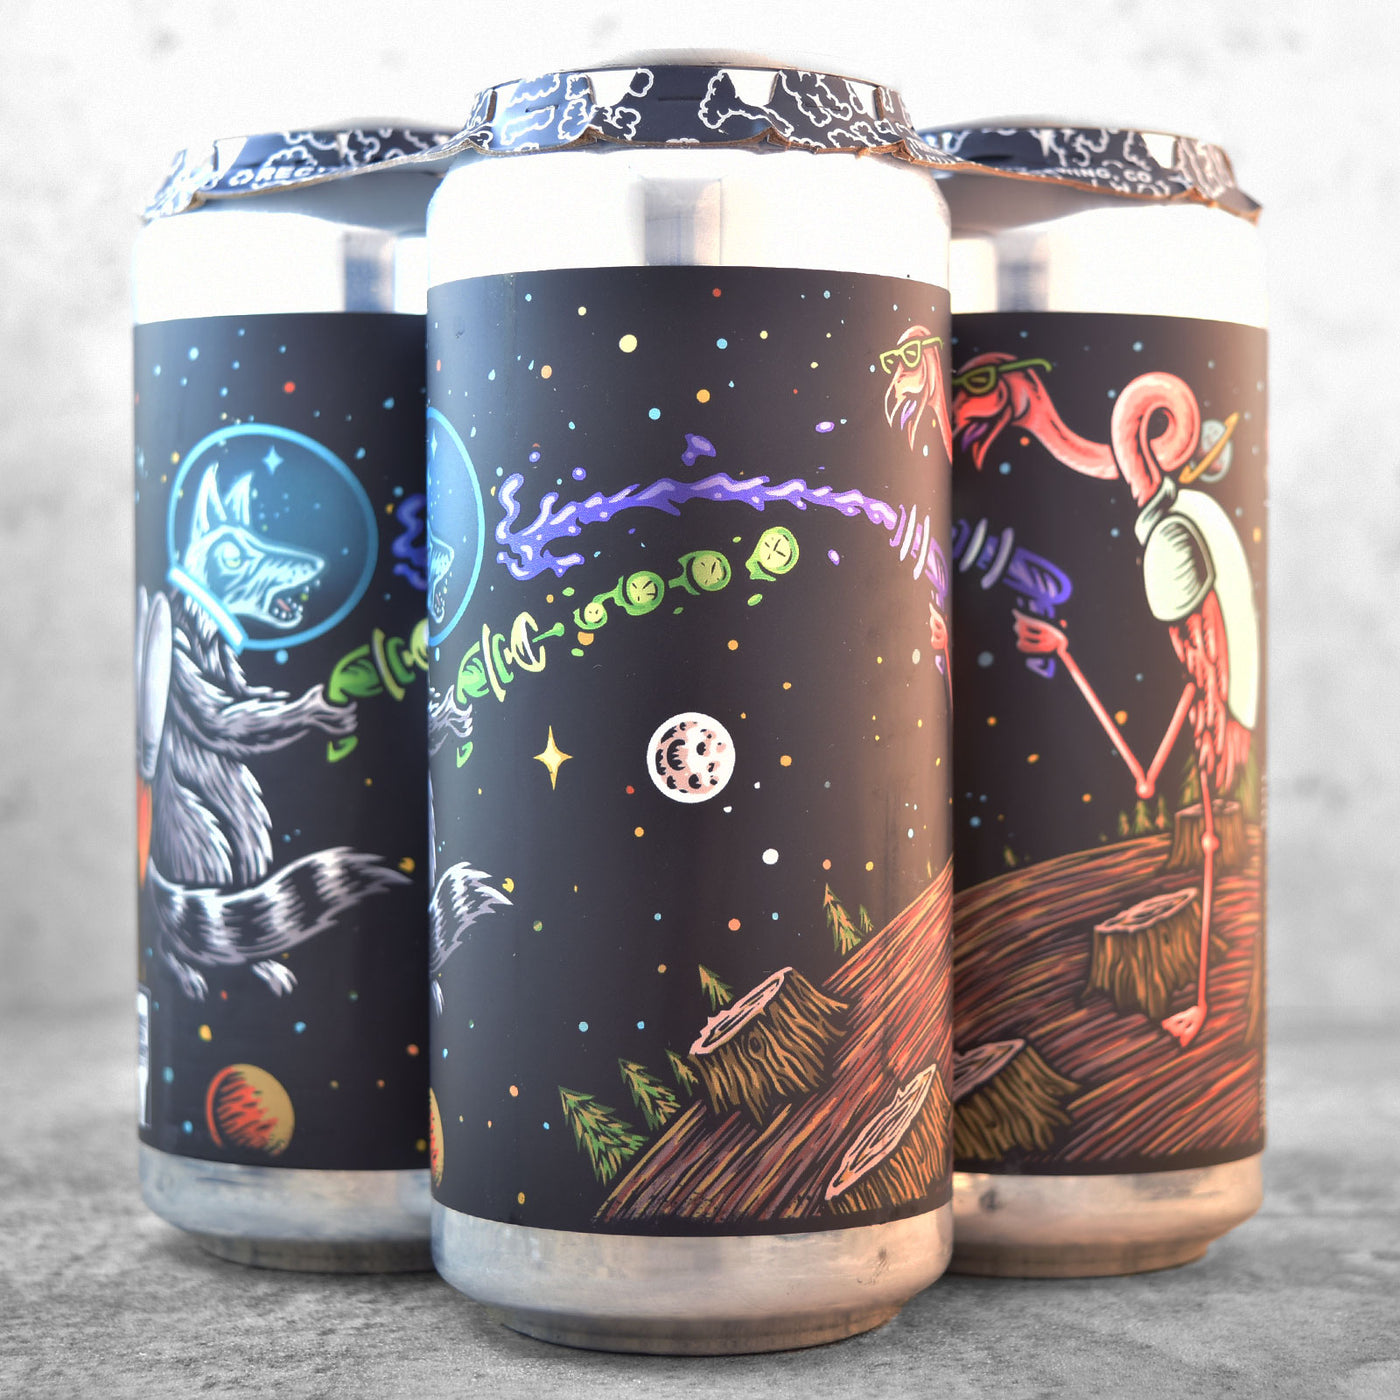 Tripping Animals / Great Notion - Cosmic Bandito 2.0